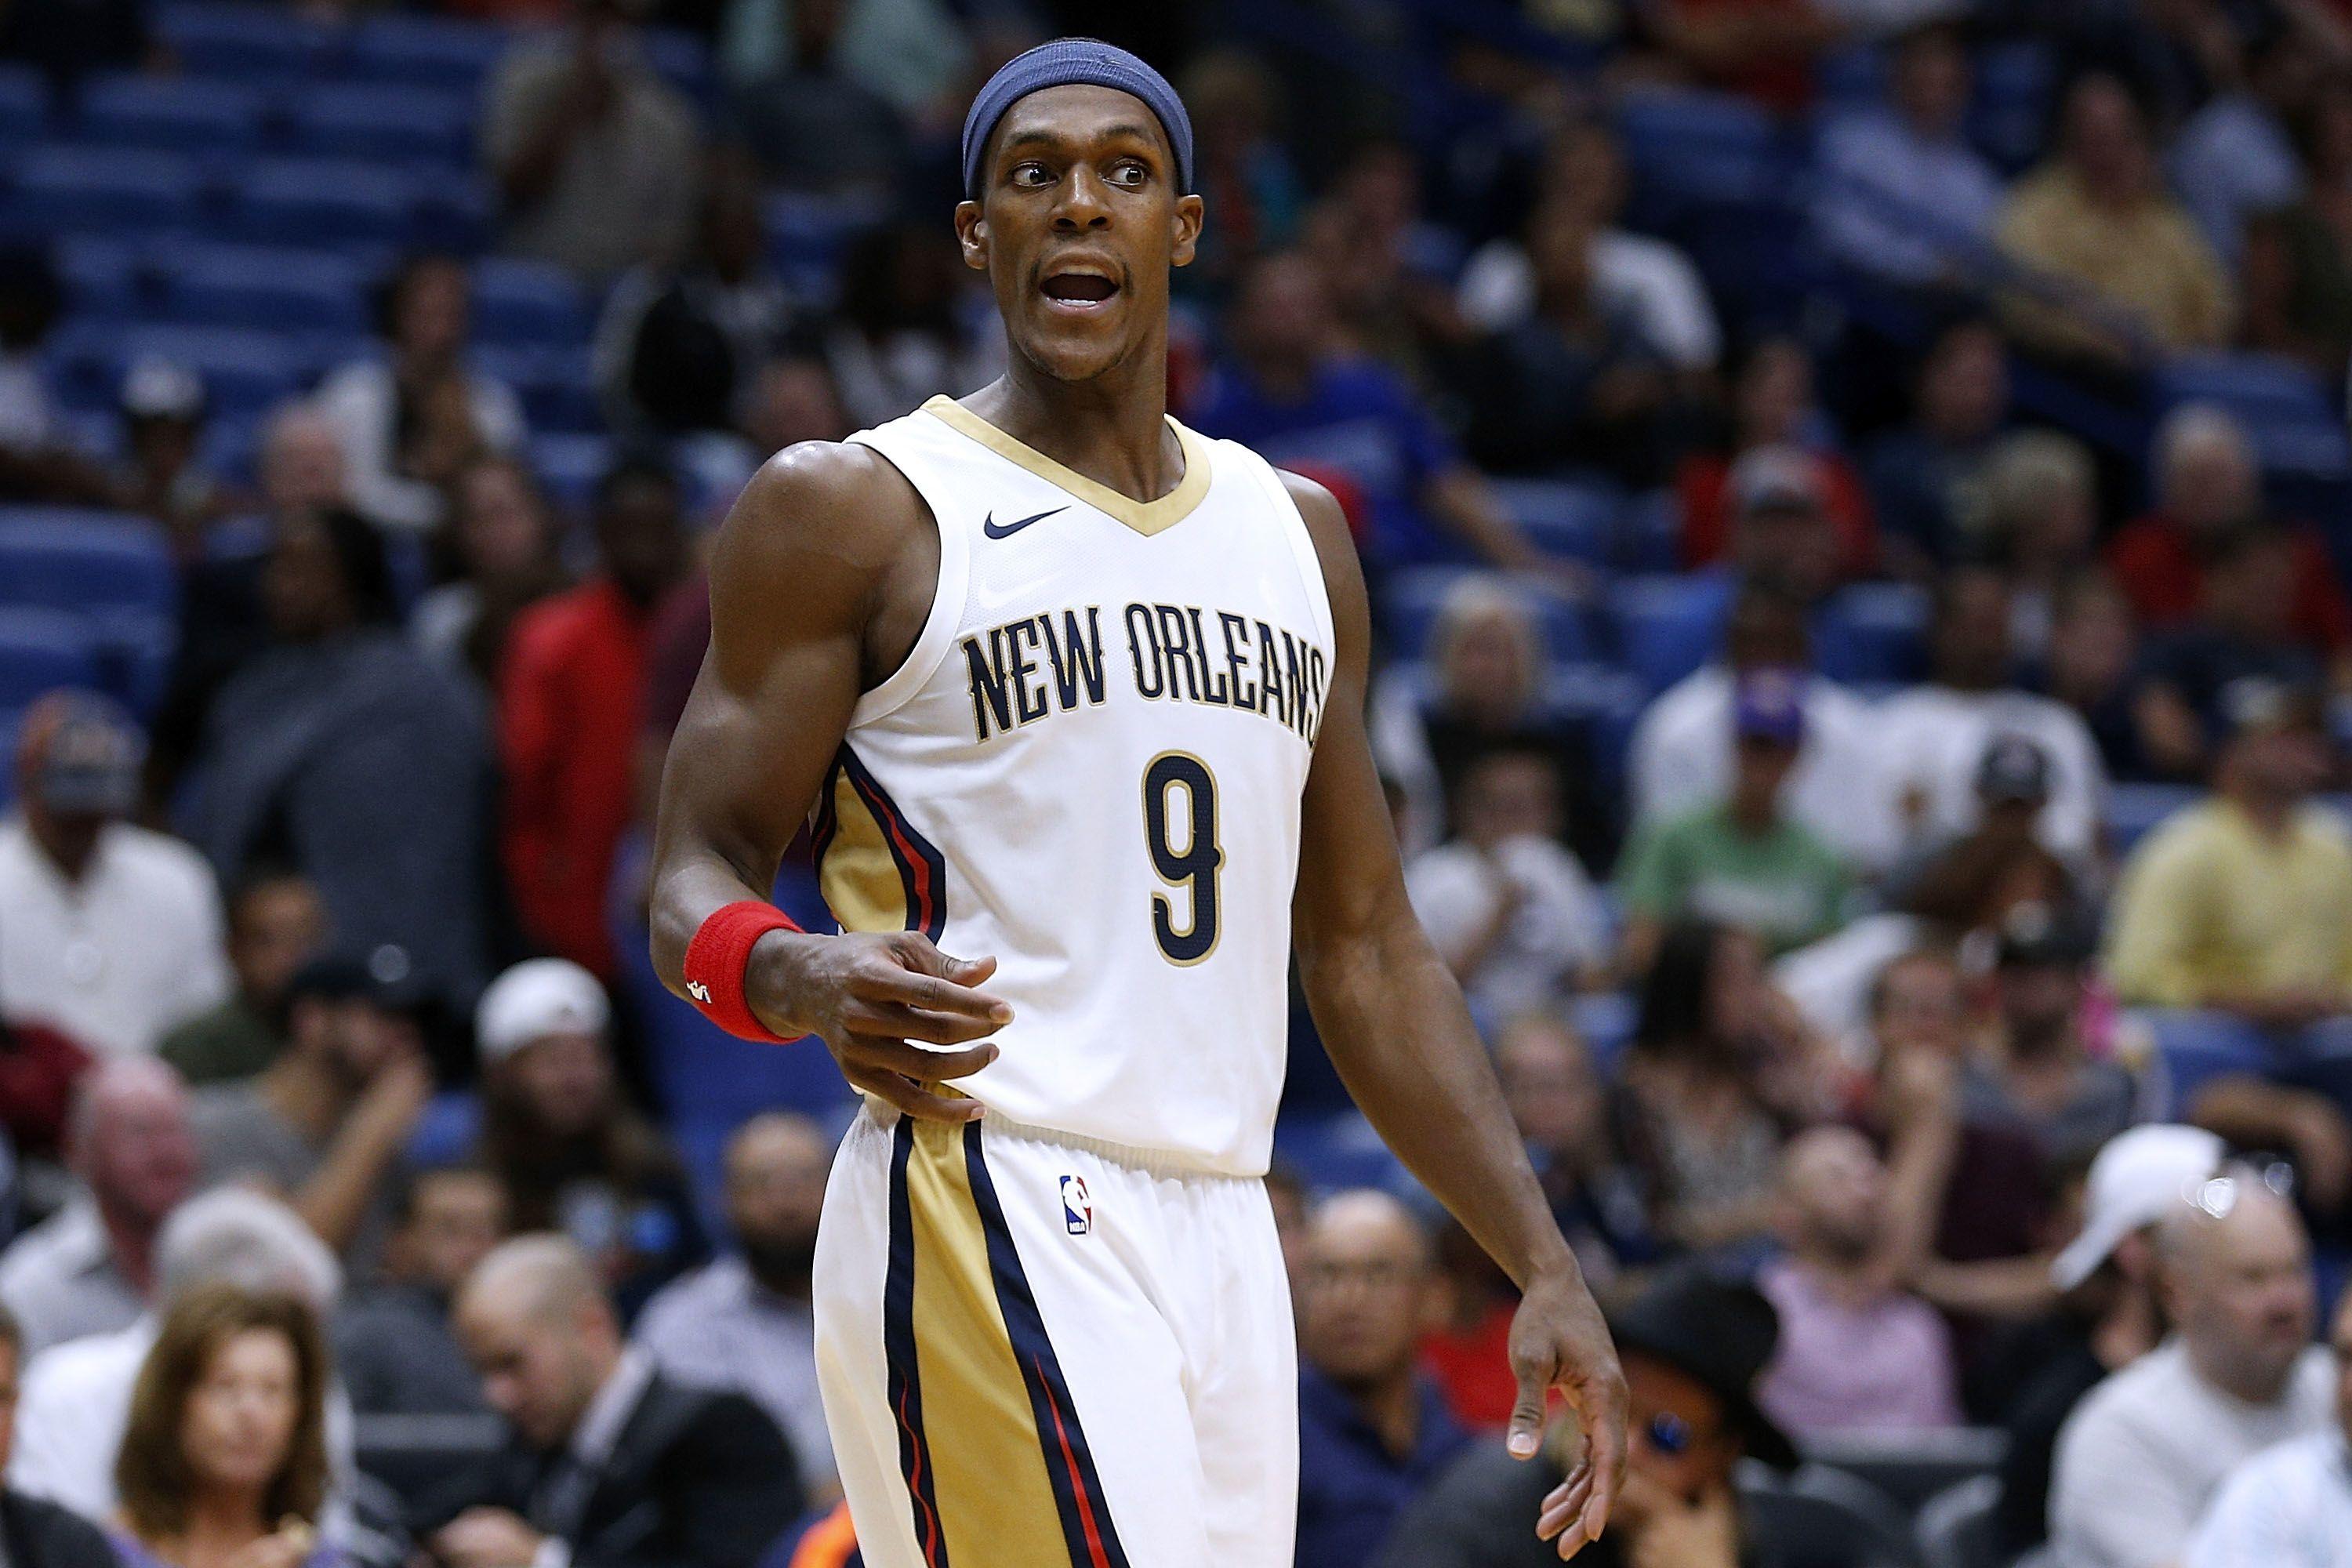 How will Rajon Rondo's injury affect the starting lineup?